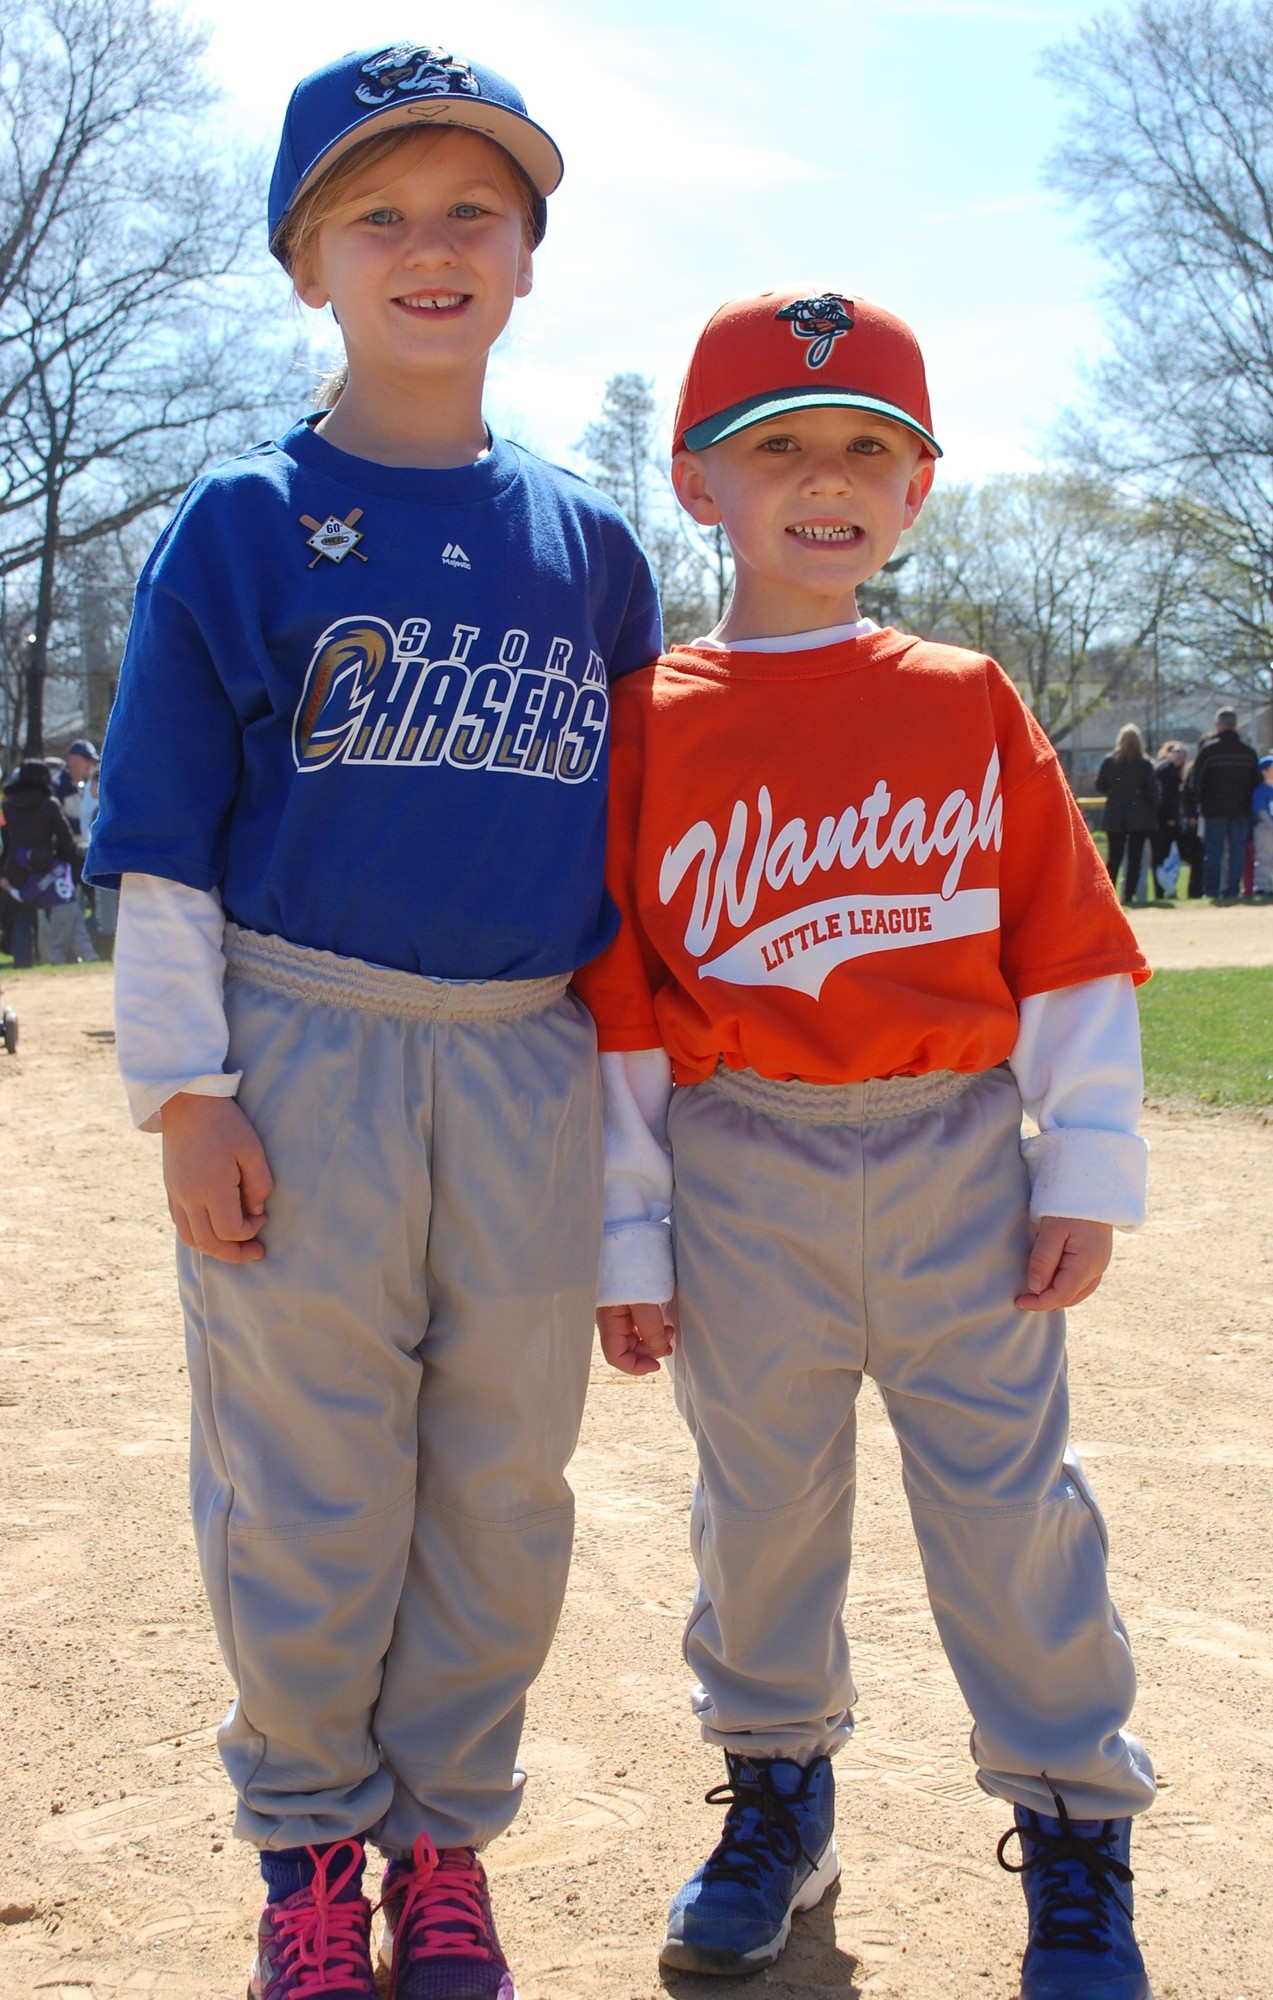 Siblings Maggie, 7, and James Kurz, 5, were excited for the start of the new baseball season.